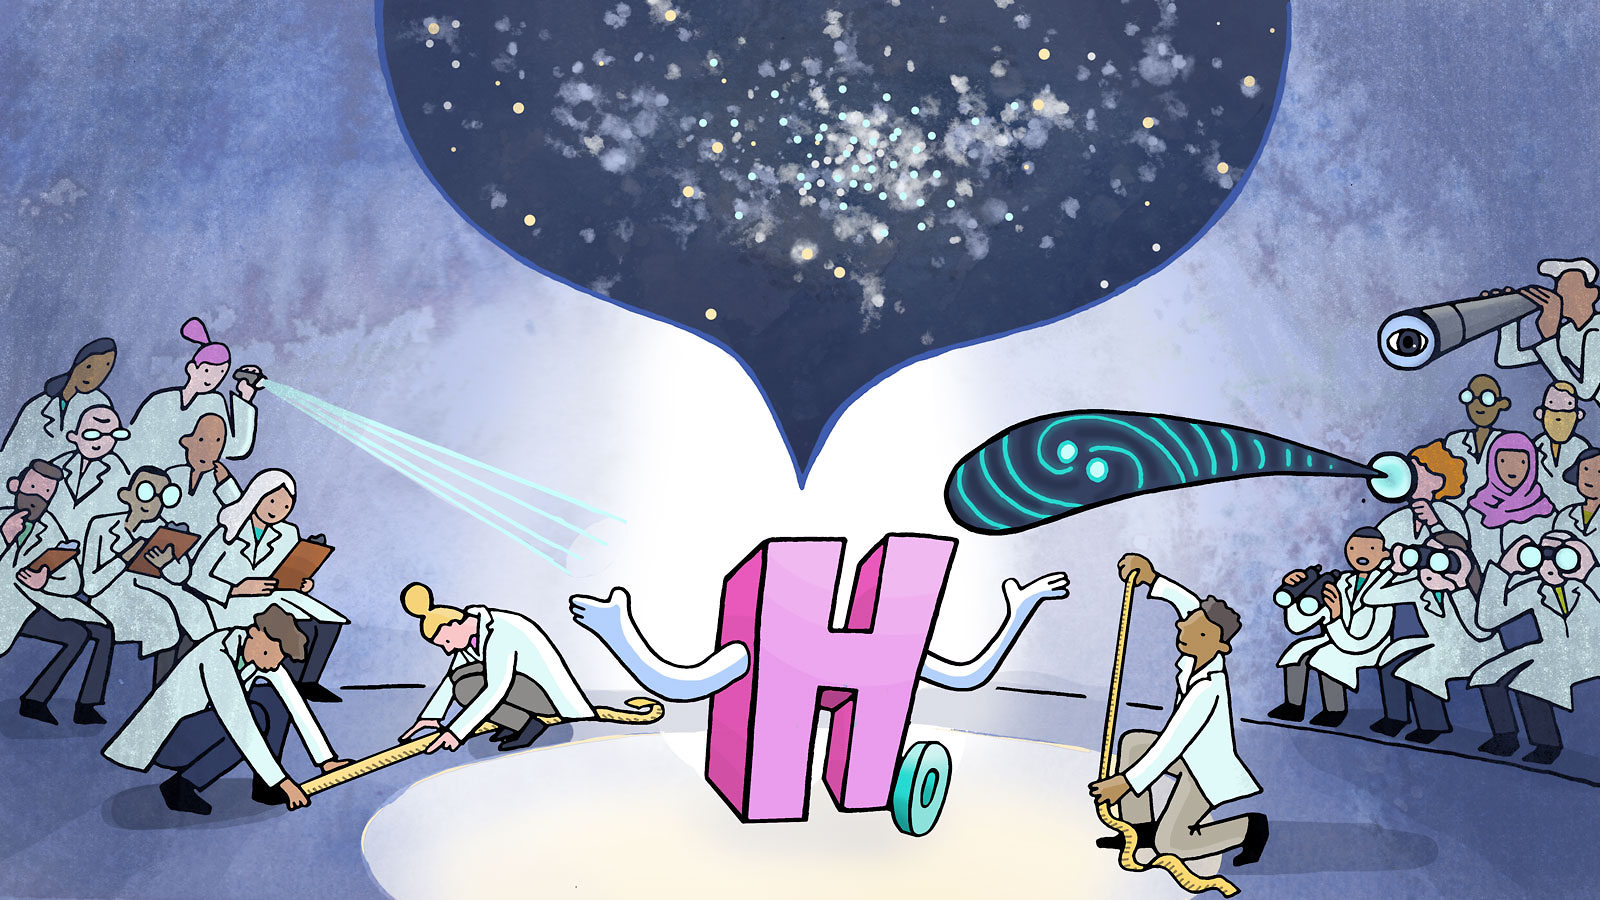 An illustration of scientists observing the Hubble constant